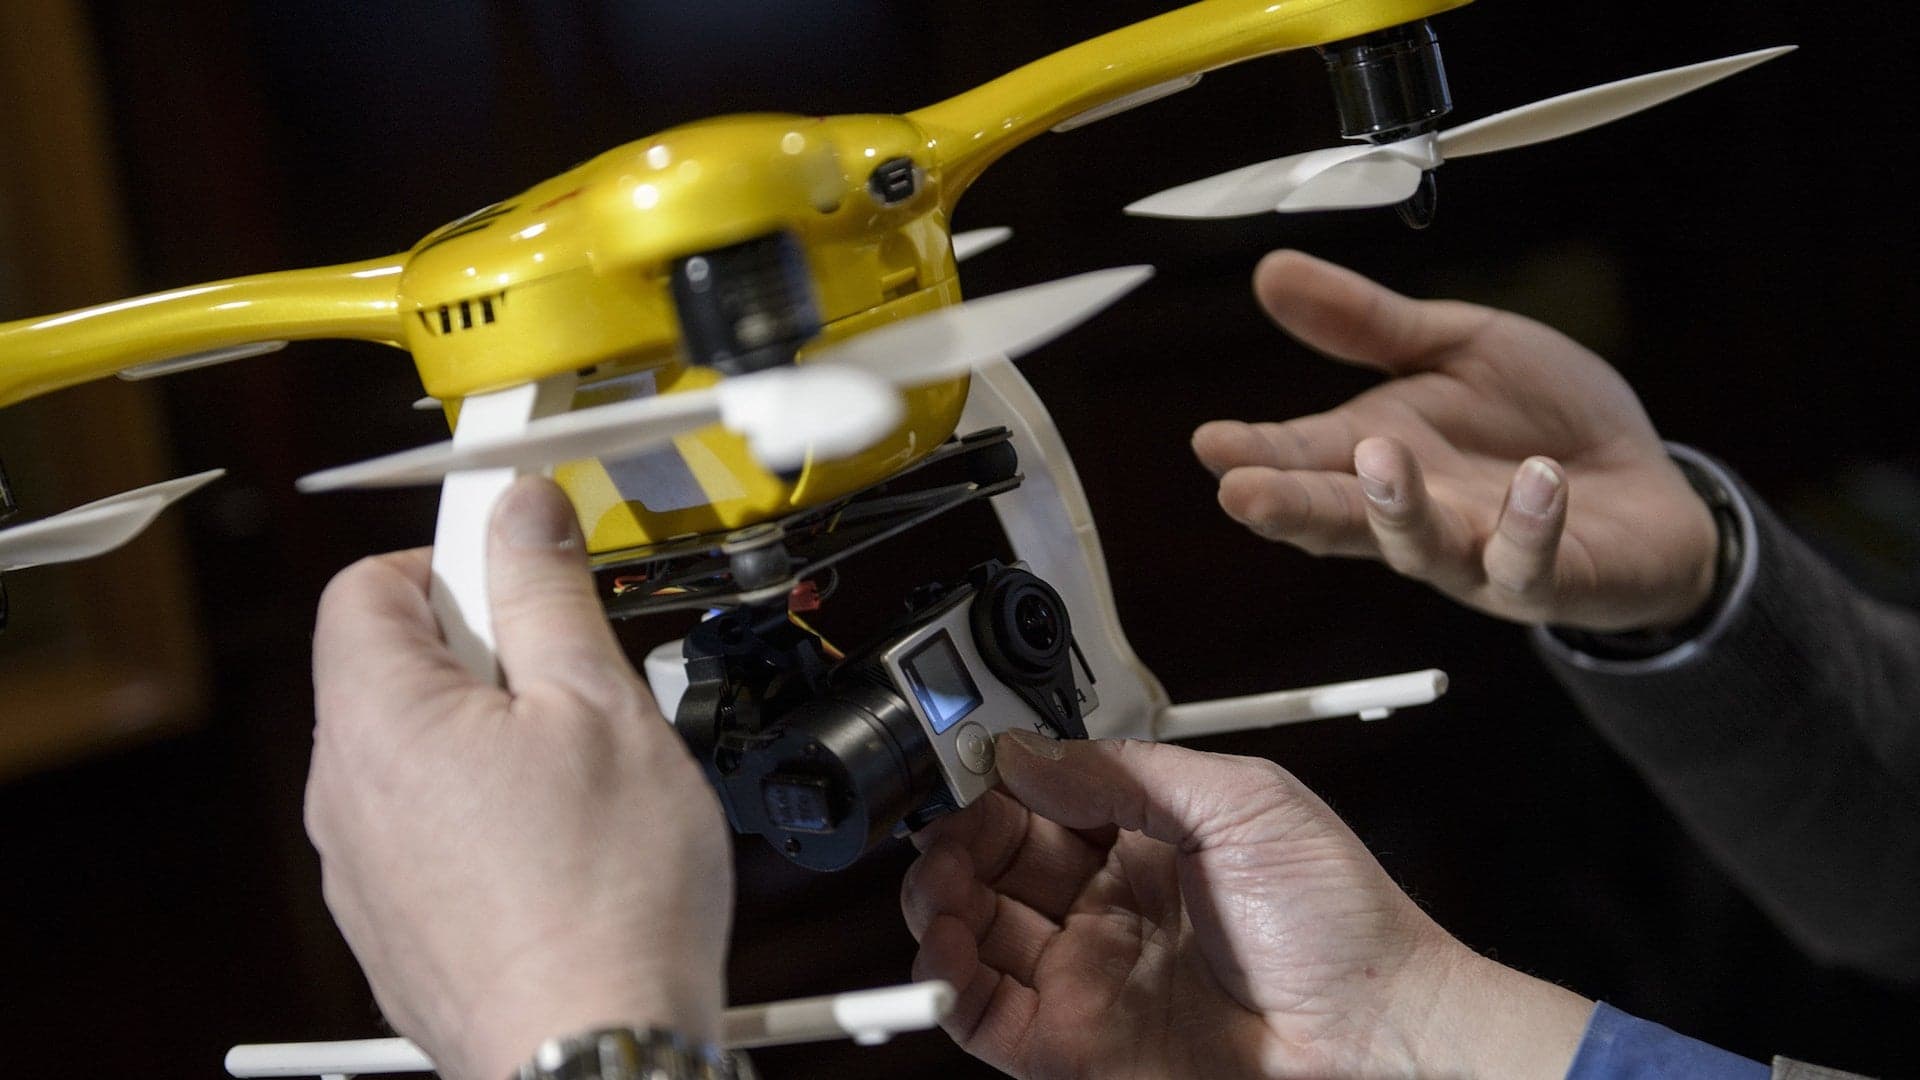 Approved FAA Reauthorization Act Allows Government to Control, Confiscate Drones